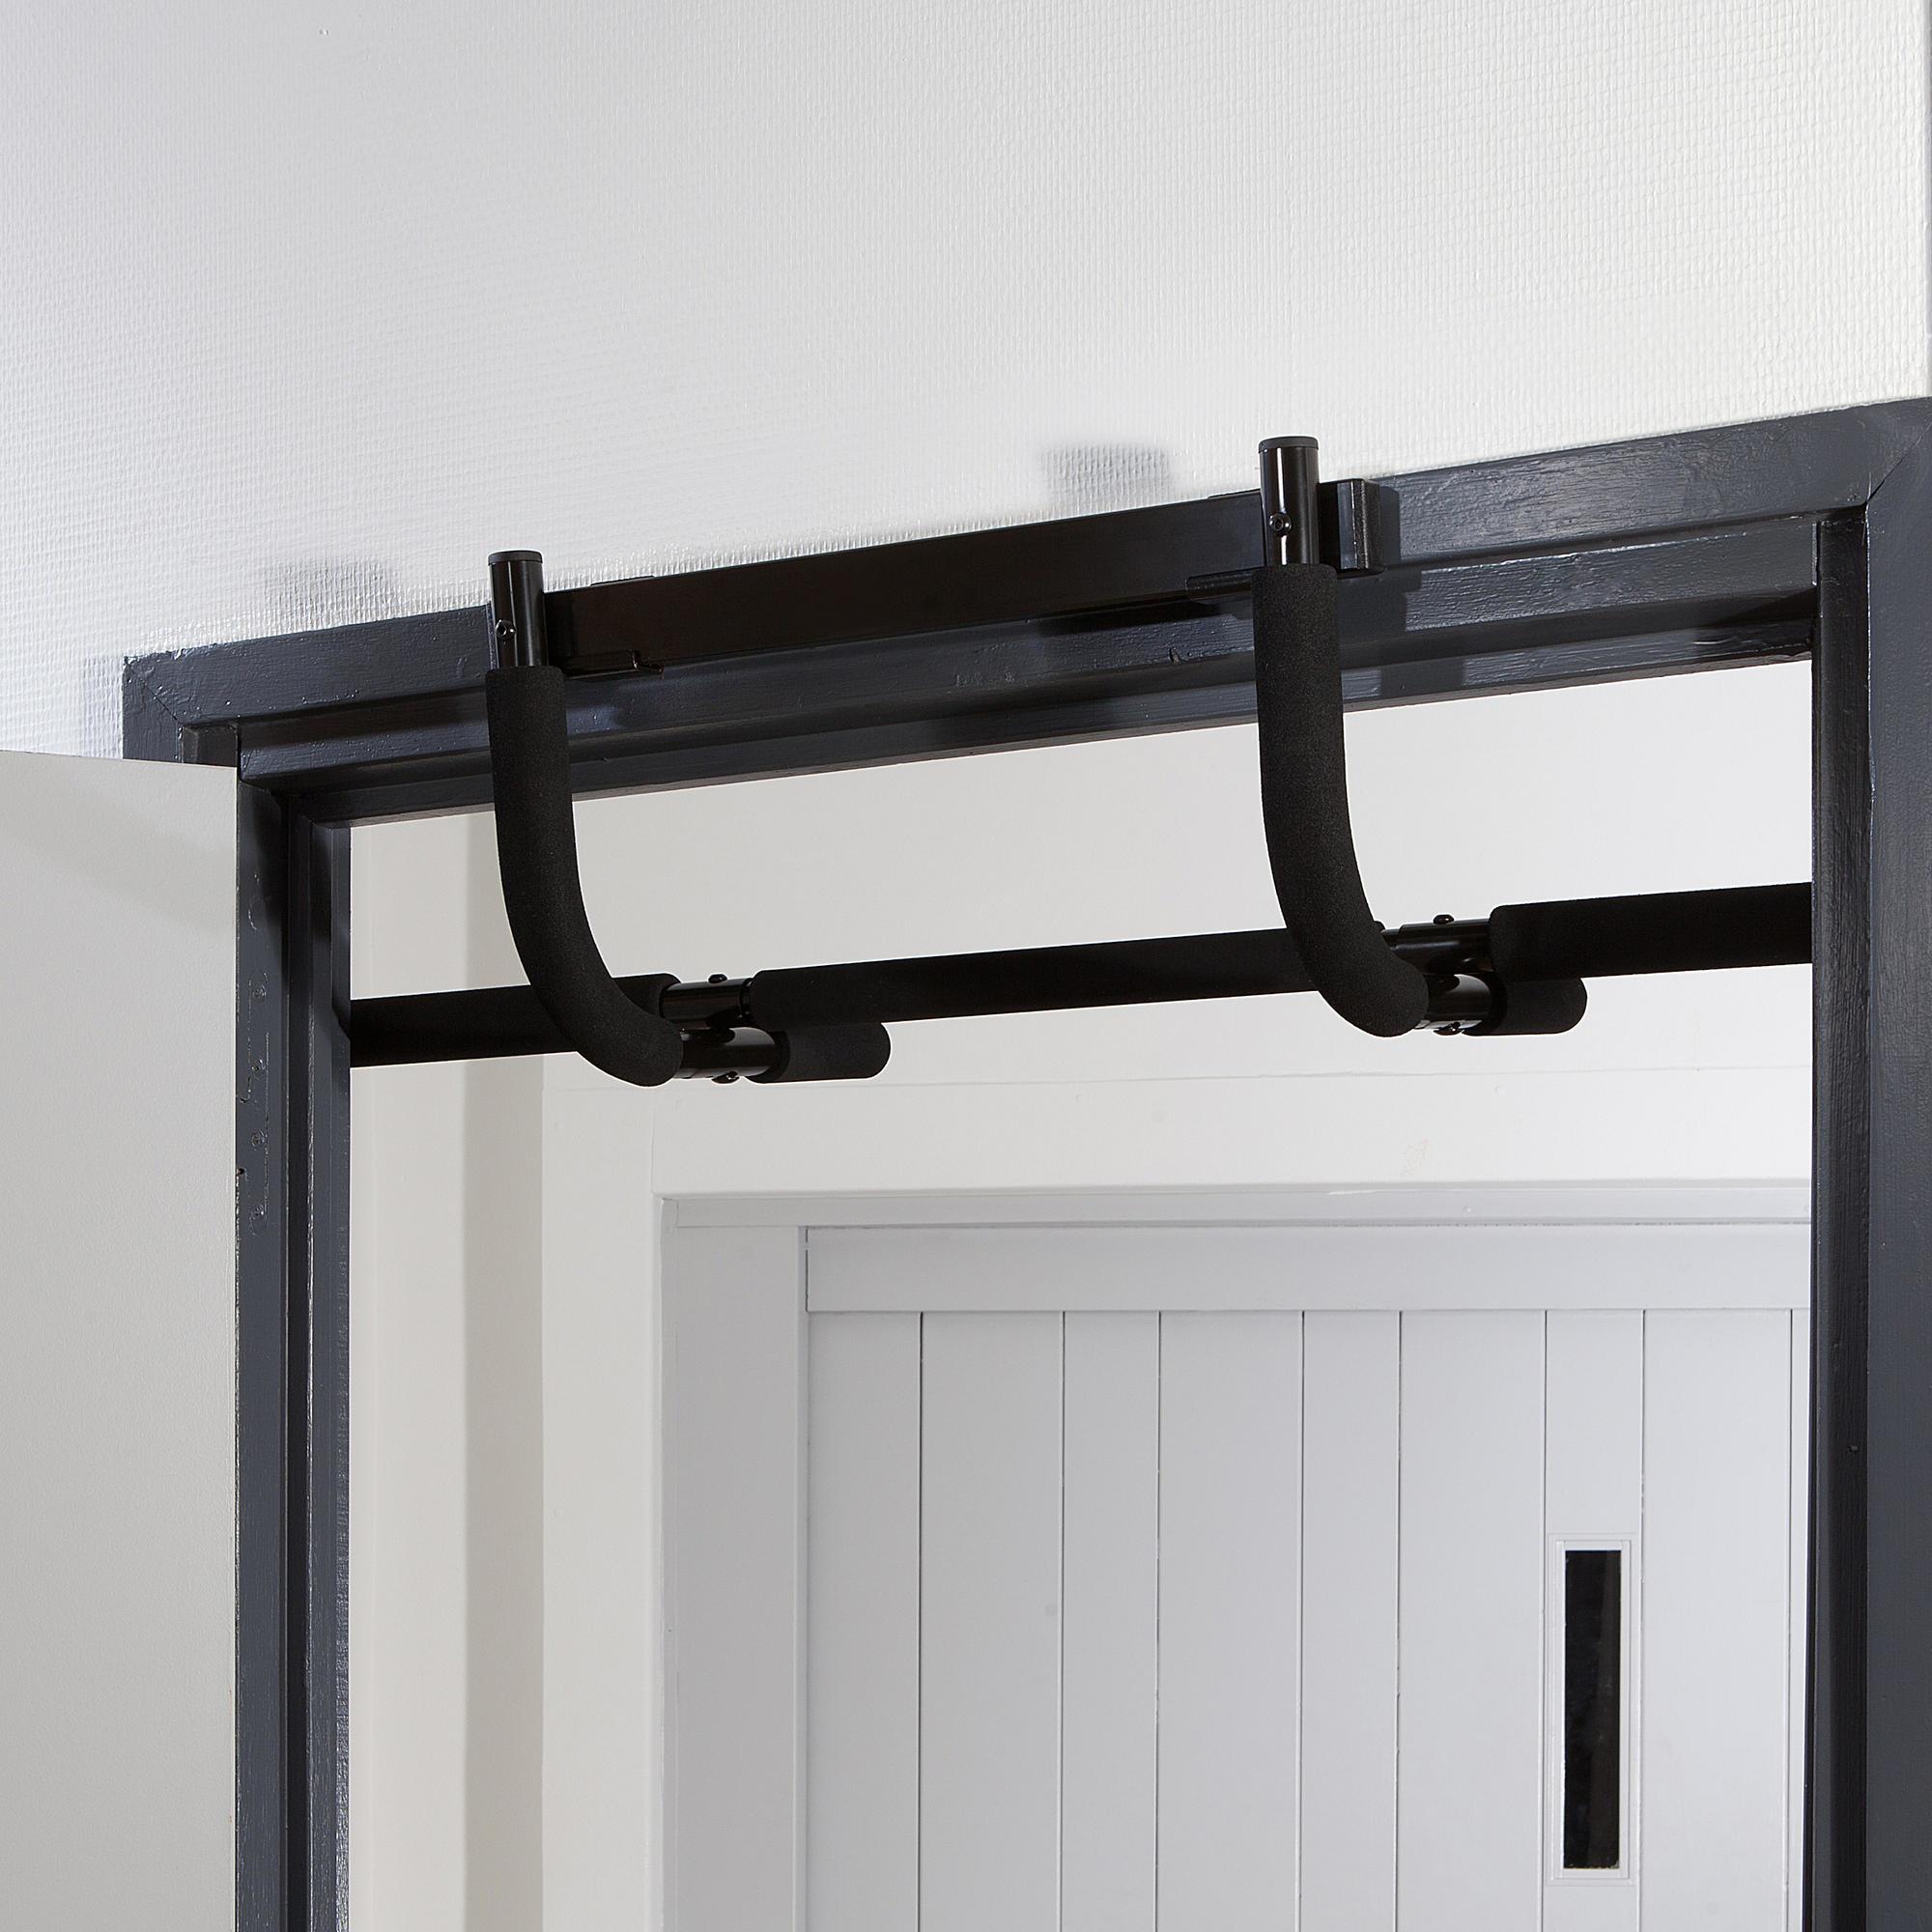 decathlon pull up bar review